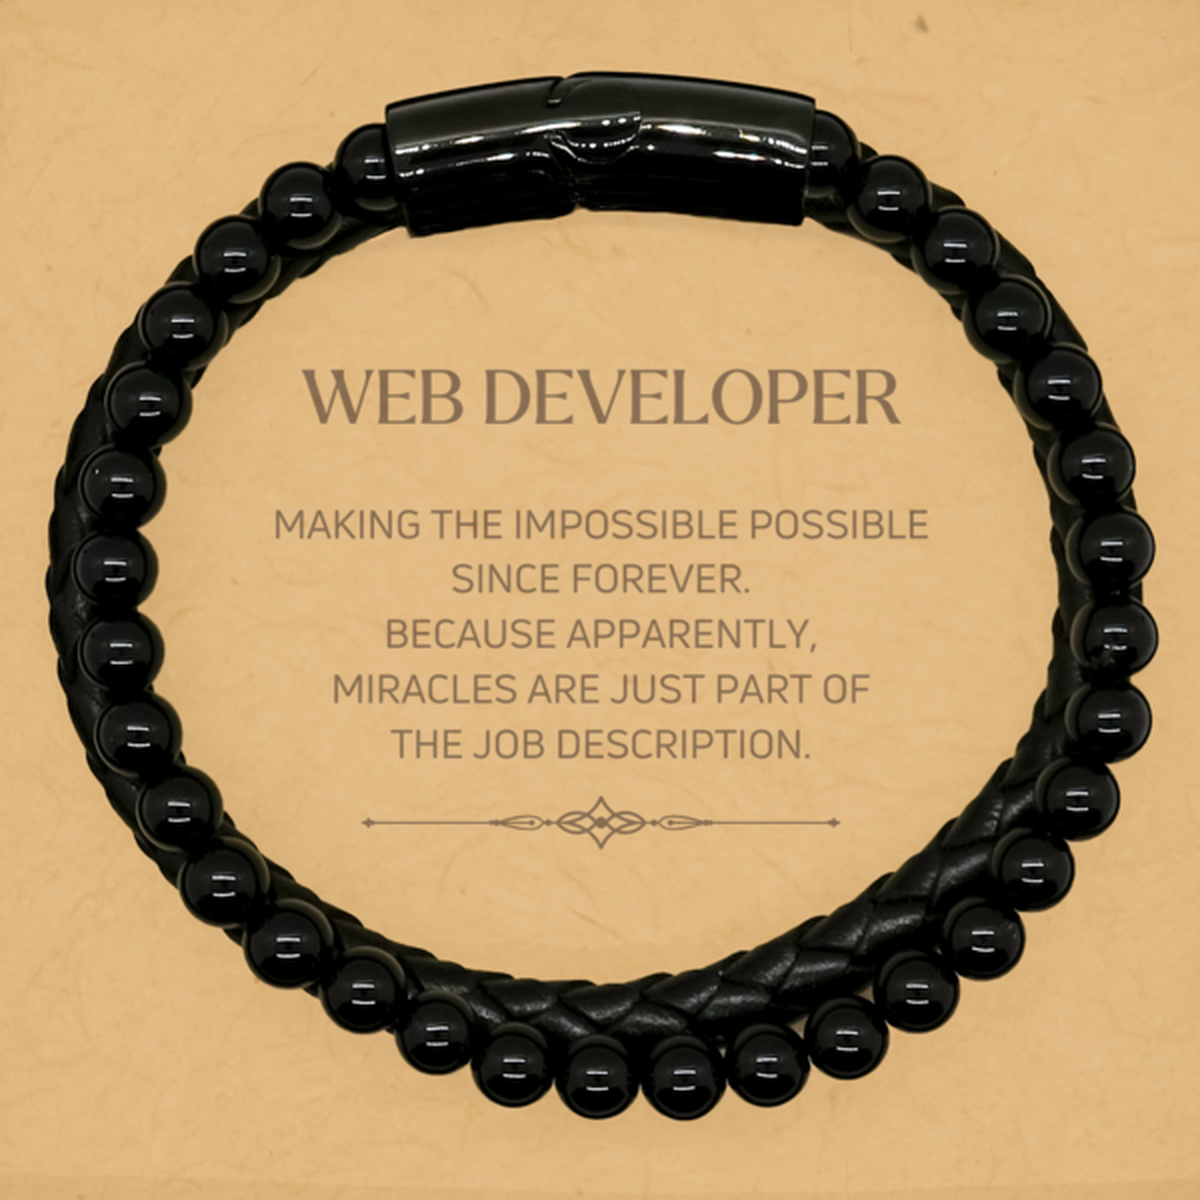 Funny Web Developer Gifts, Miracles are just part of the job description, Inspirational Birthday Stone Leather Bracelets For Web Developer, Men, Women, Coworkers, Friends, Boss